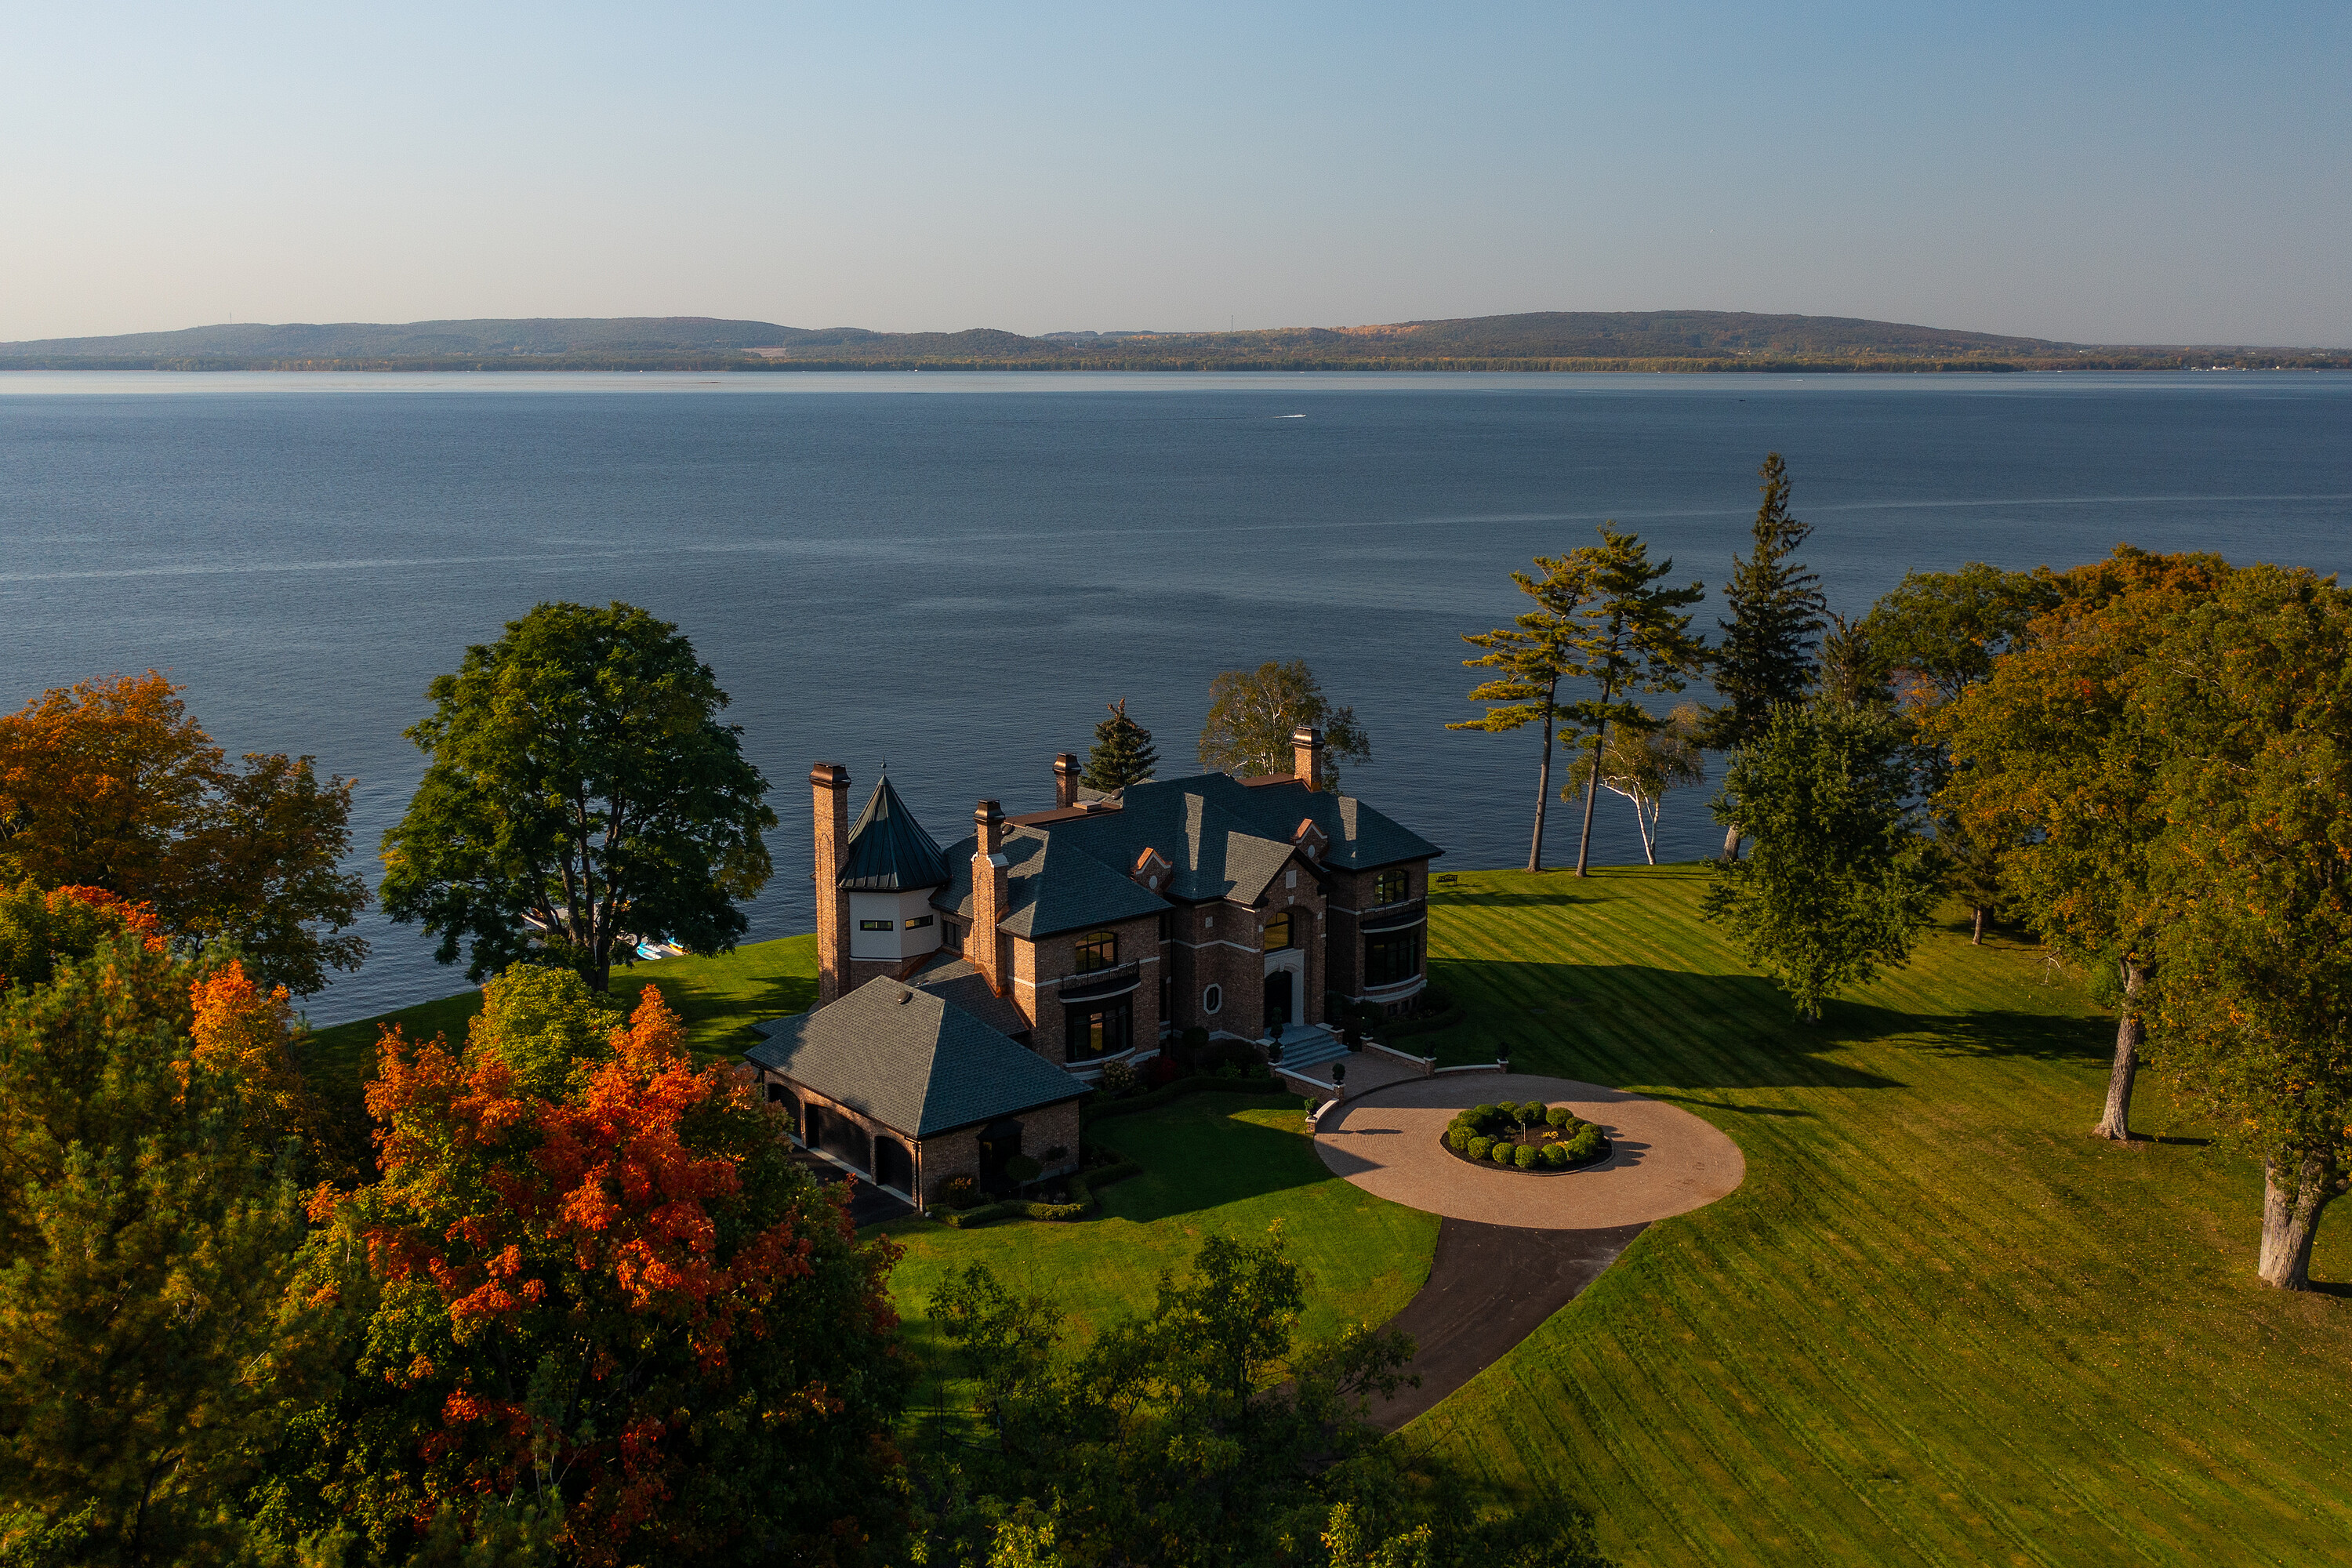 The majestic, six-acre waterfront estate that has set a new historic record as the highest residential property sale through the MLS® (Multiple Listing Service) system is located in Senneville.